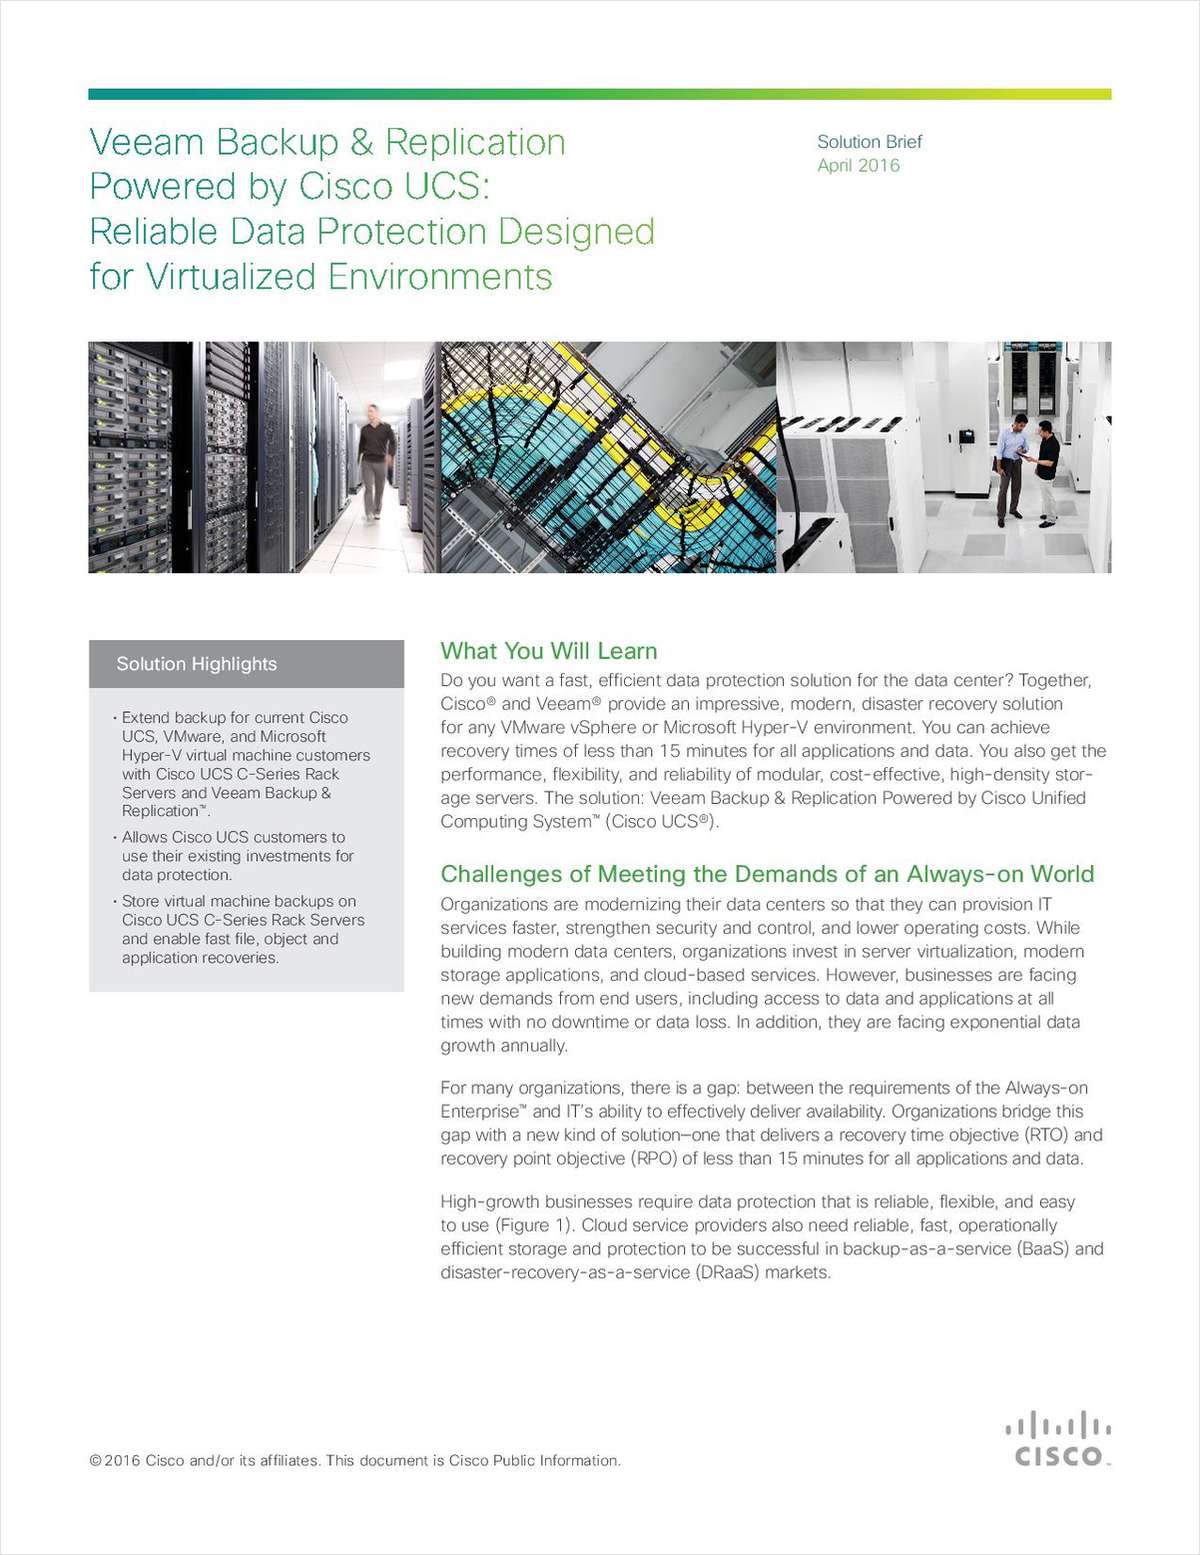 w aaaa6623c8 - Veeam Backup & Replication Powered by Cisco UCS: Reliable Data Protection Designed for Virtualized Environments